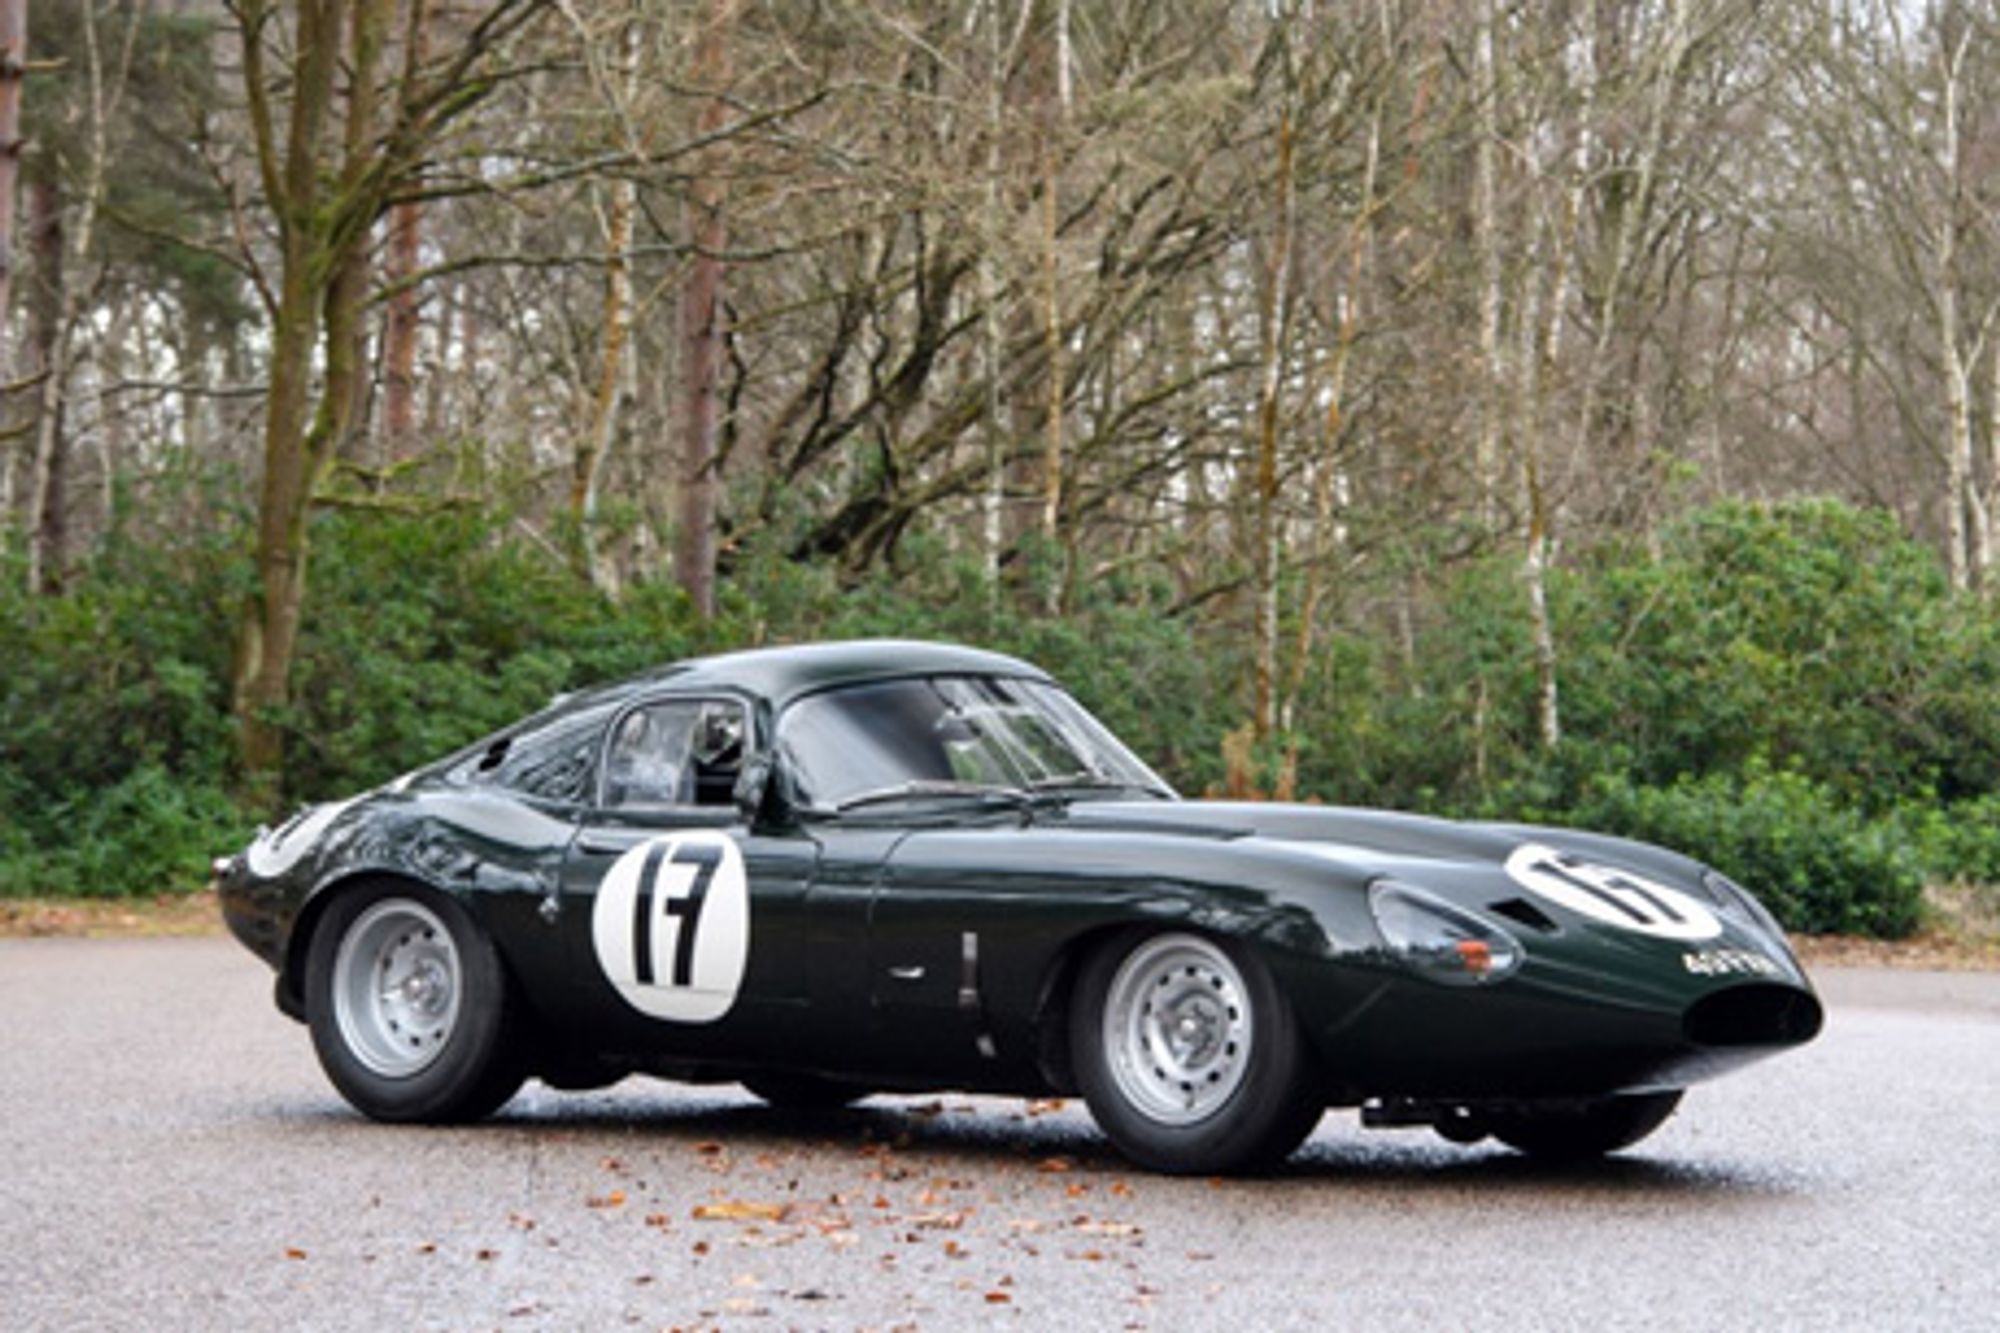 Fiskens steal the limelight at Salon Rétromobile with '49 FXN', the 1963 ‘Lowdrag’ Jaguar E-Type Lightweight